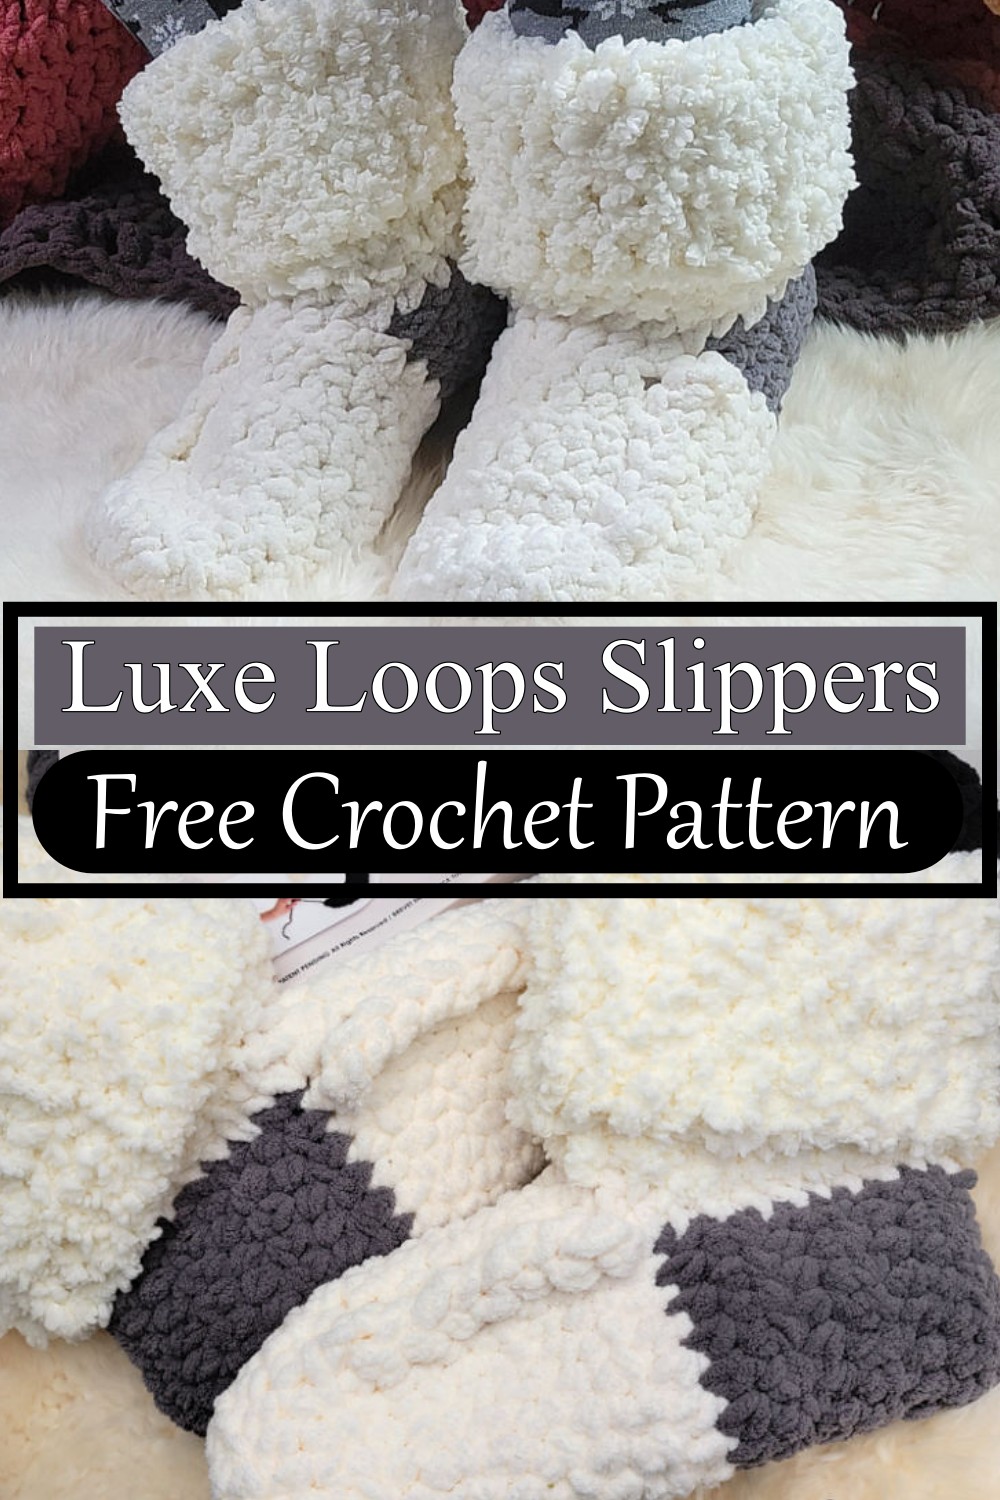 Luxe Loops Slippers